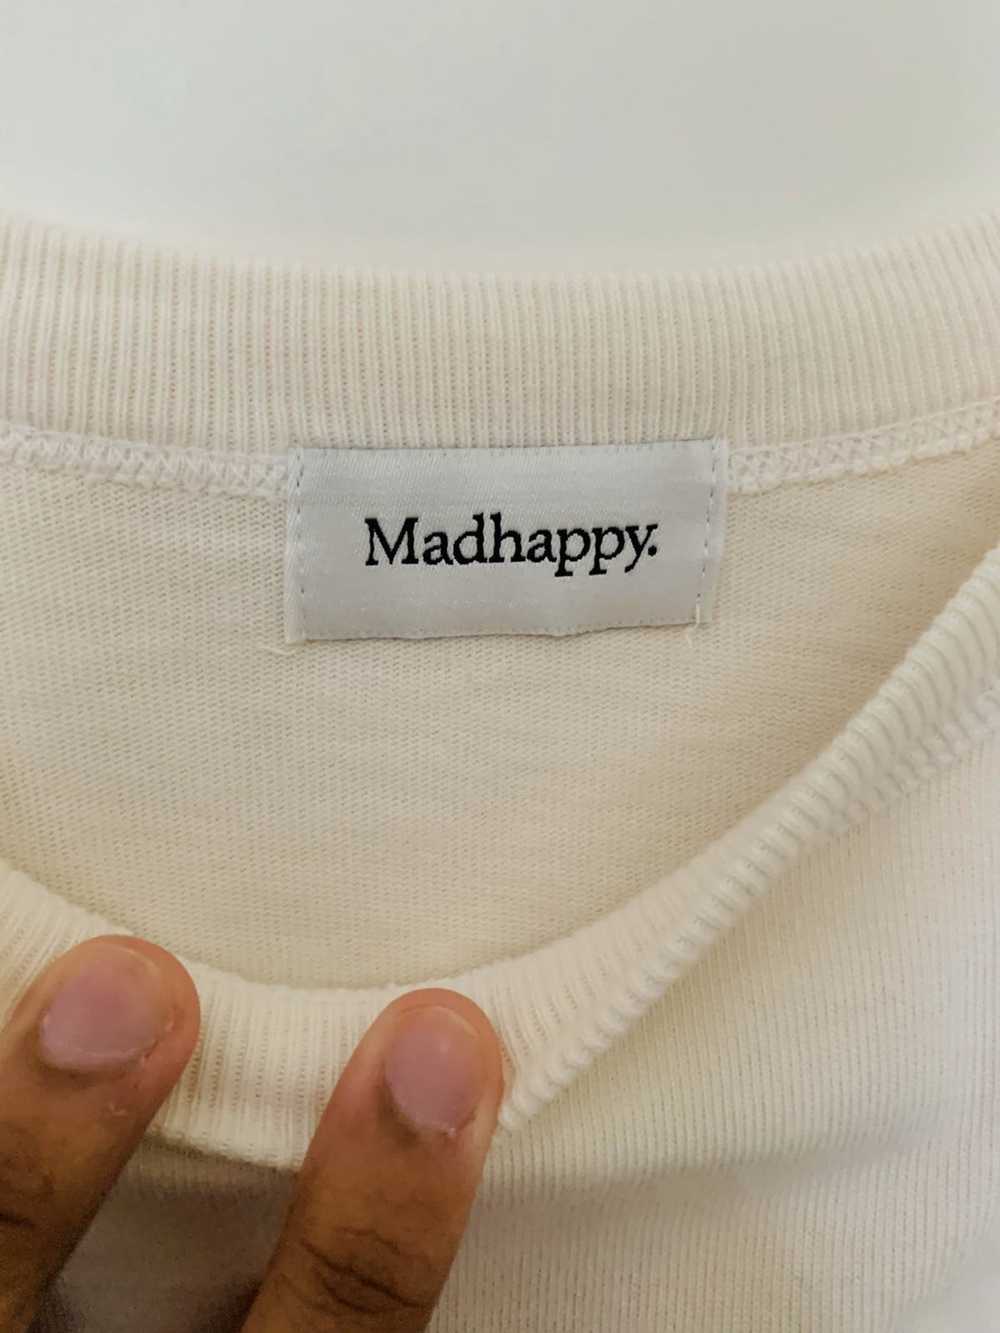 Madhappy Madhappy Melrose Pop Up City of Angels T… - image 7